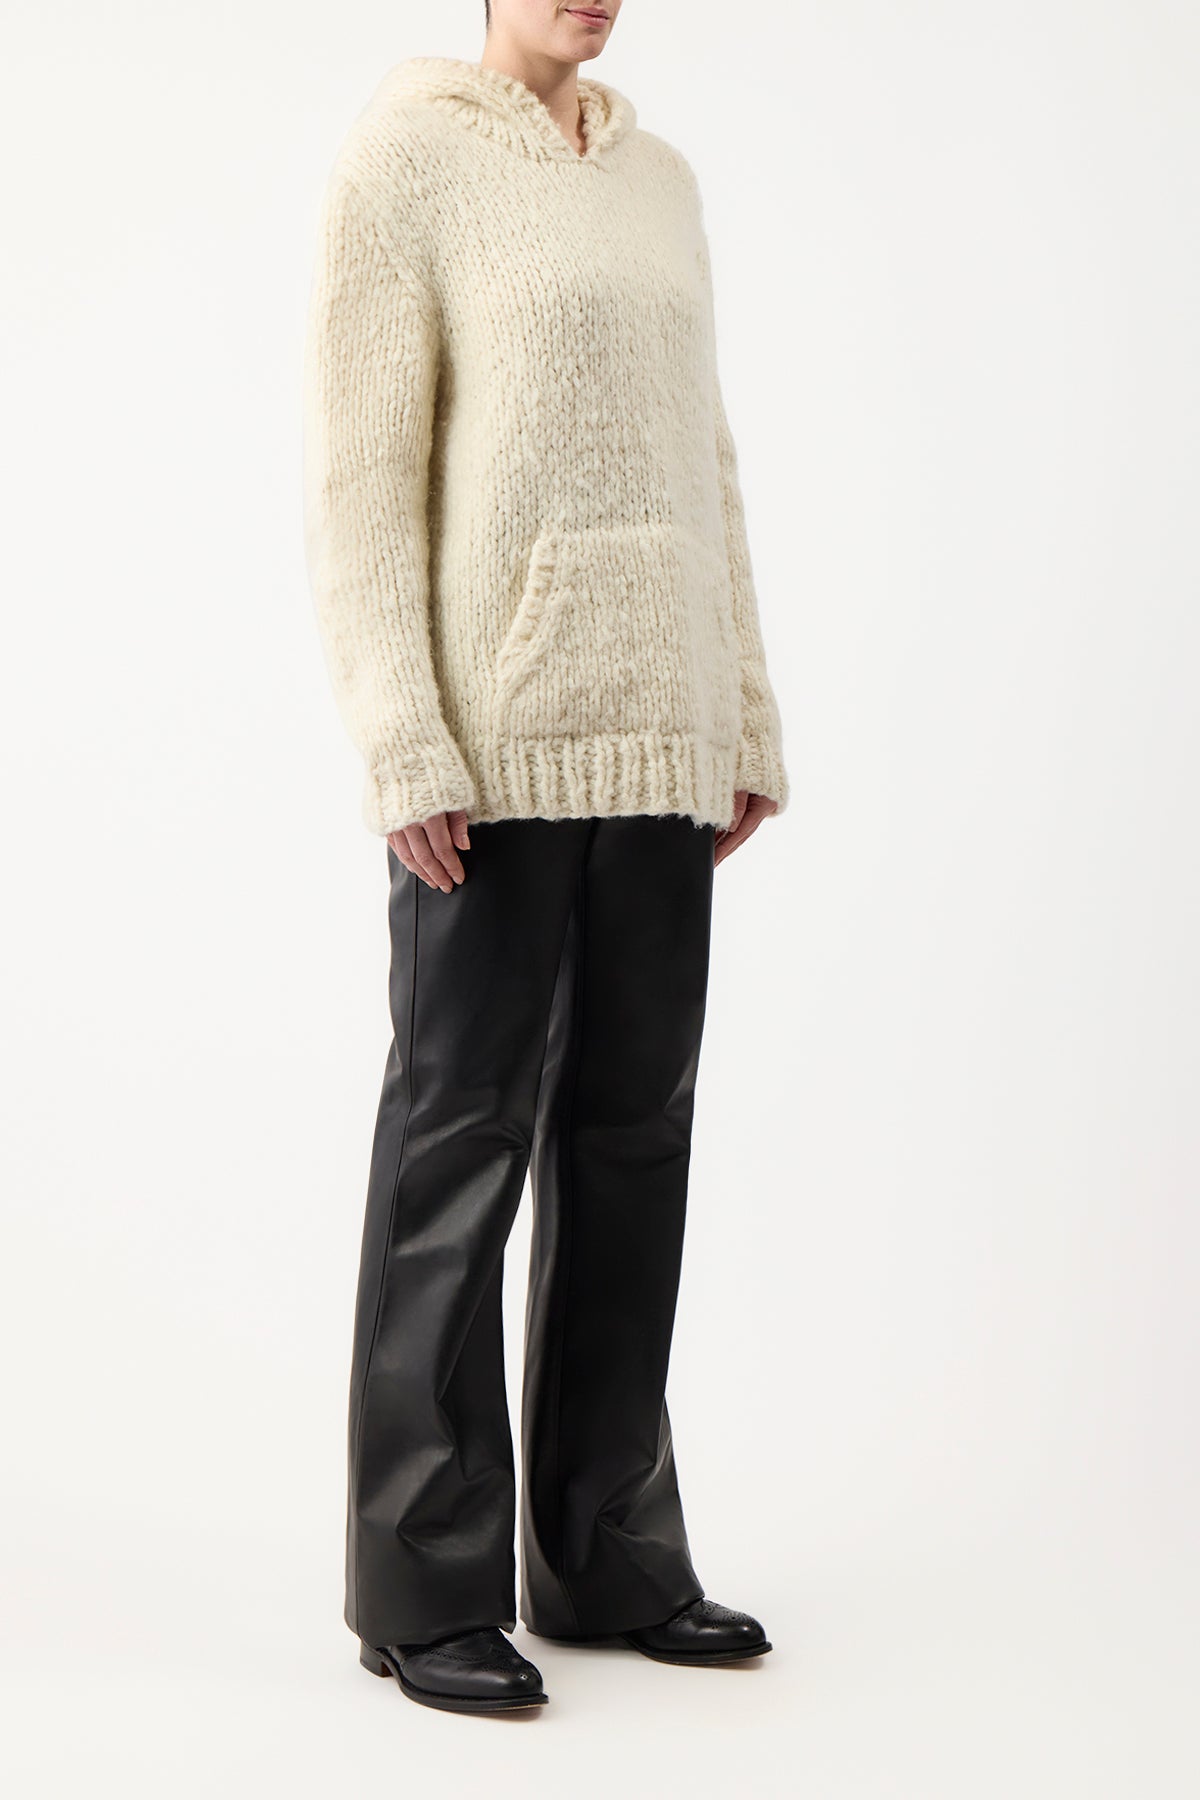 Carlton Knit Hoodie in Ivory Welfat Cashmere